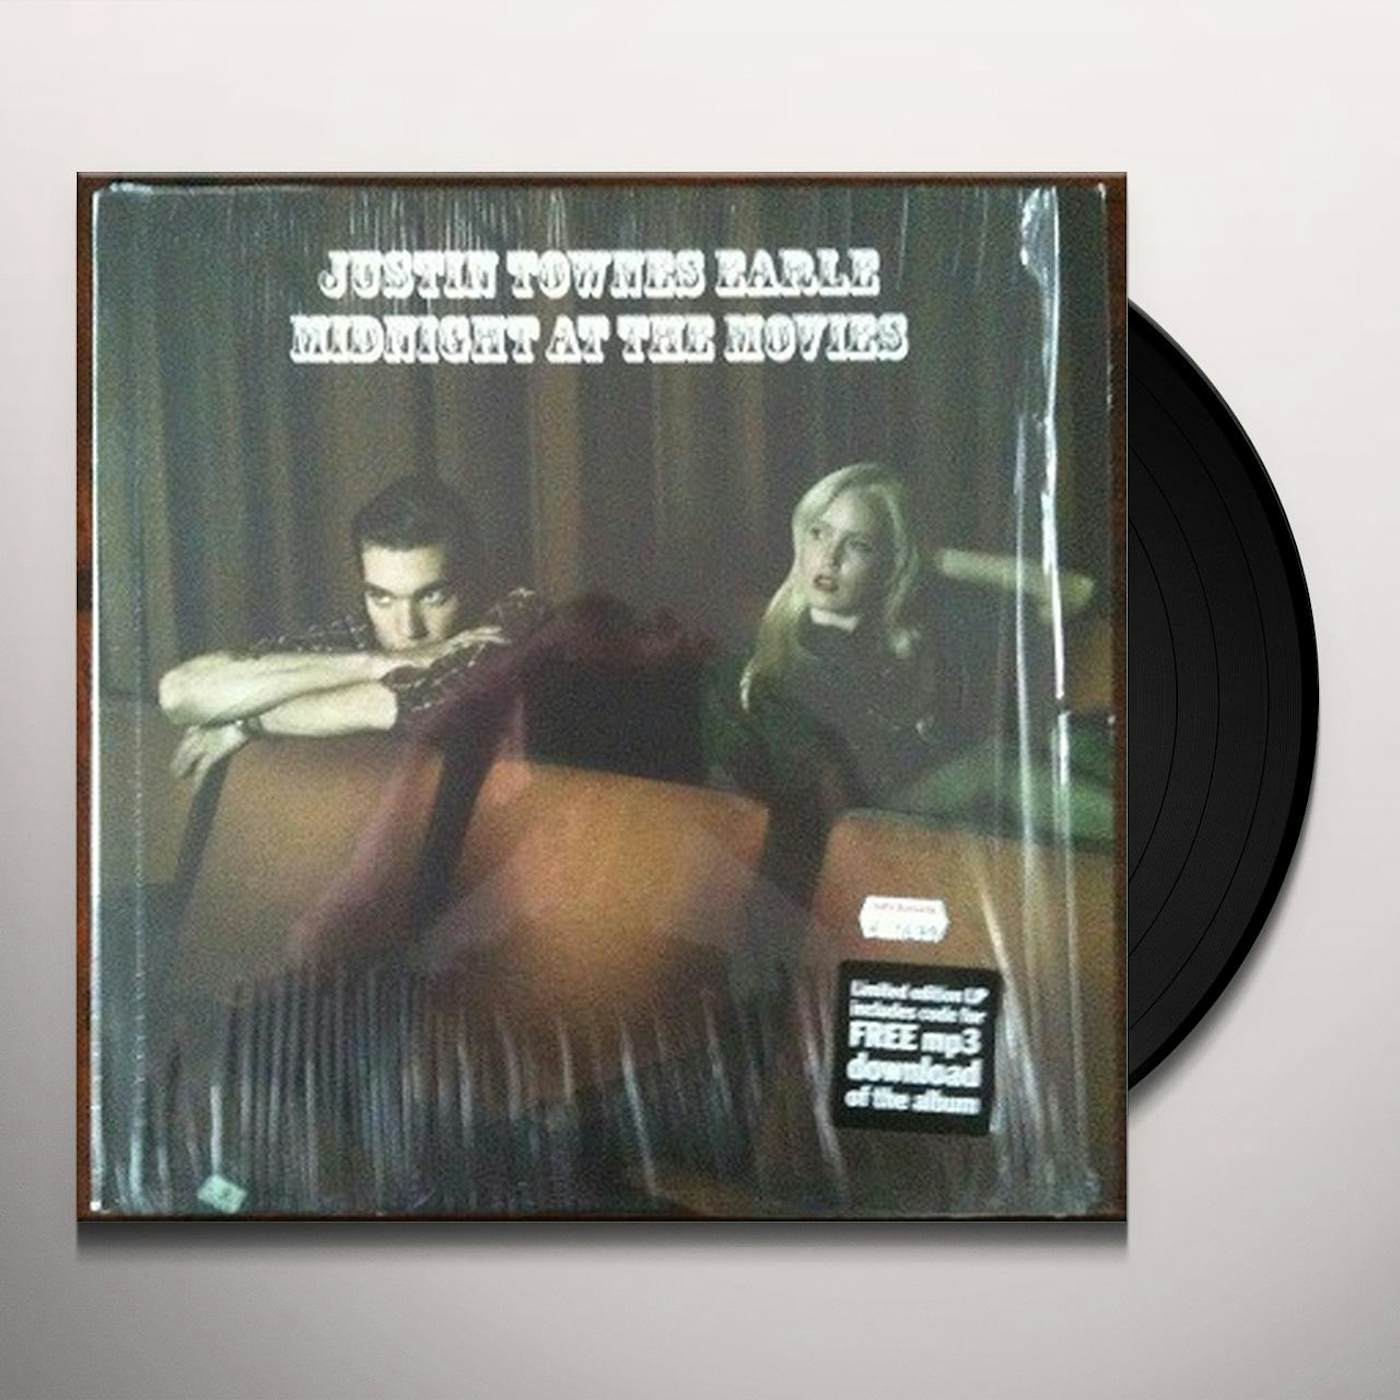 Justin Townes Earle Midnight at the Movies Vinyl Record